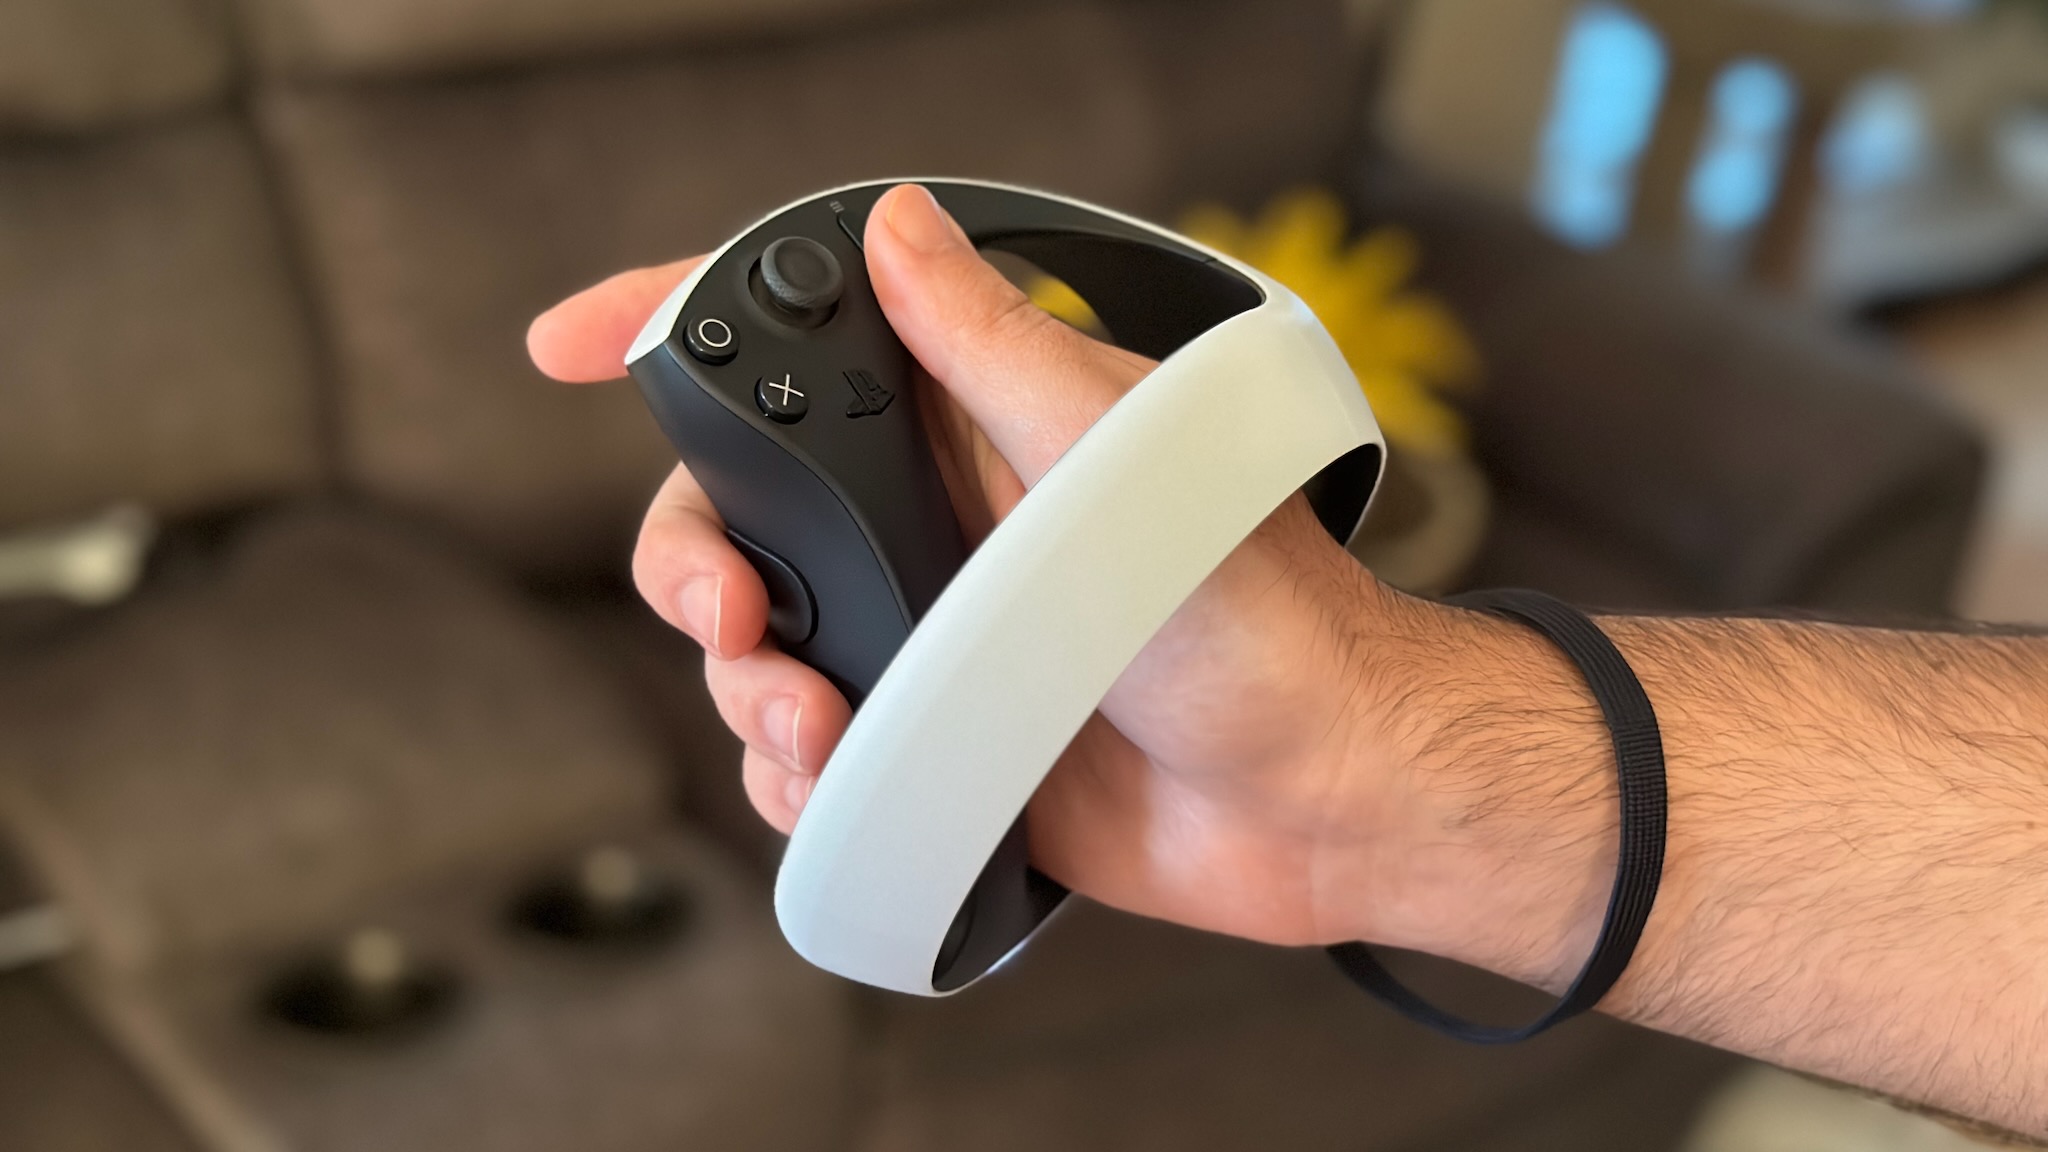 Sony PS VR2 Sense controller held in hand with strap attached to wrist.